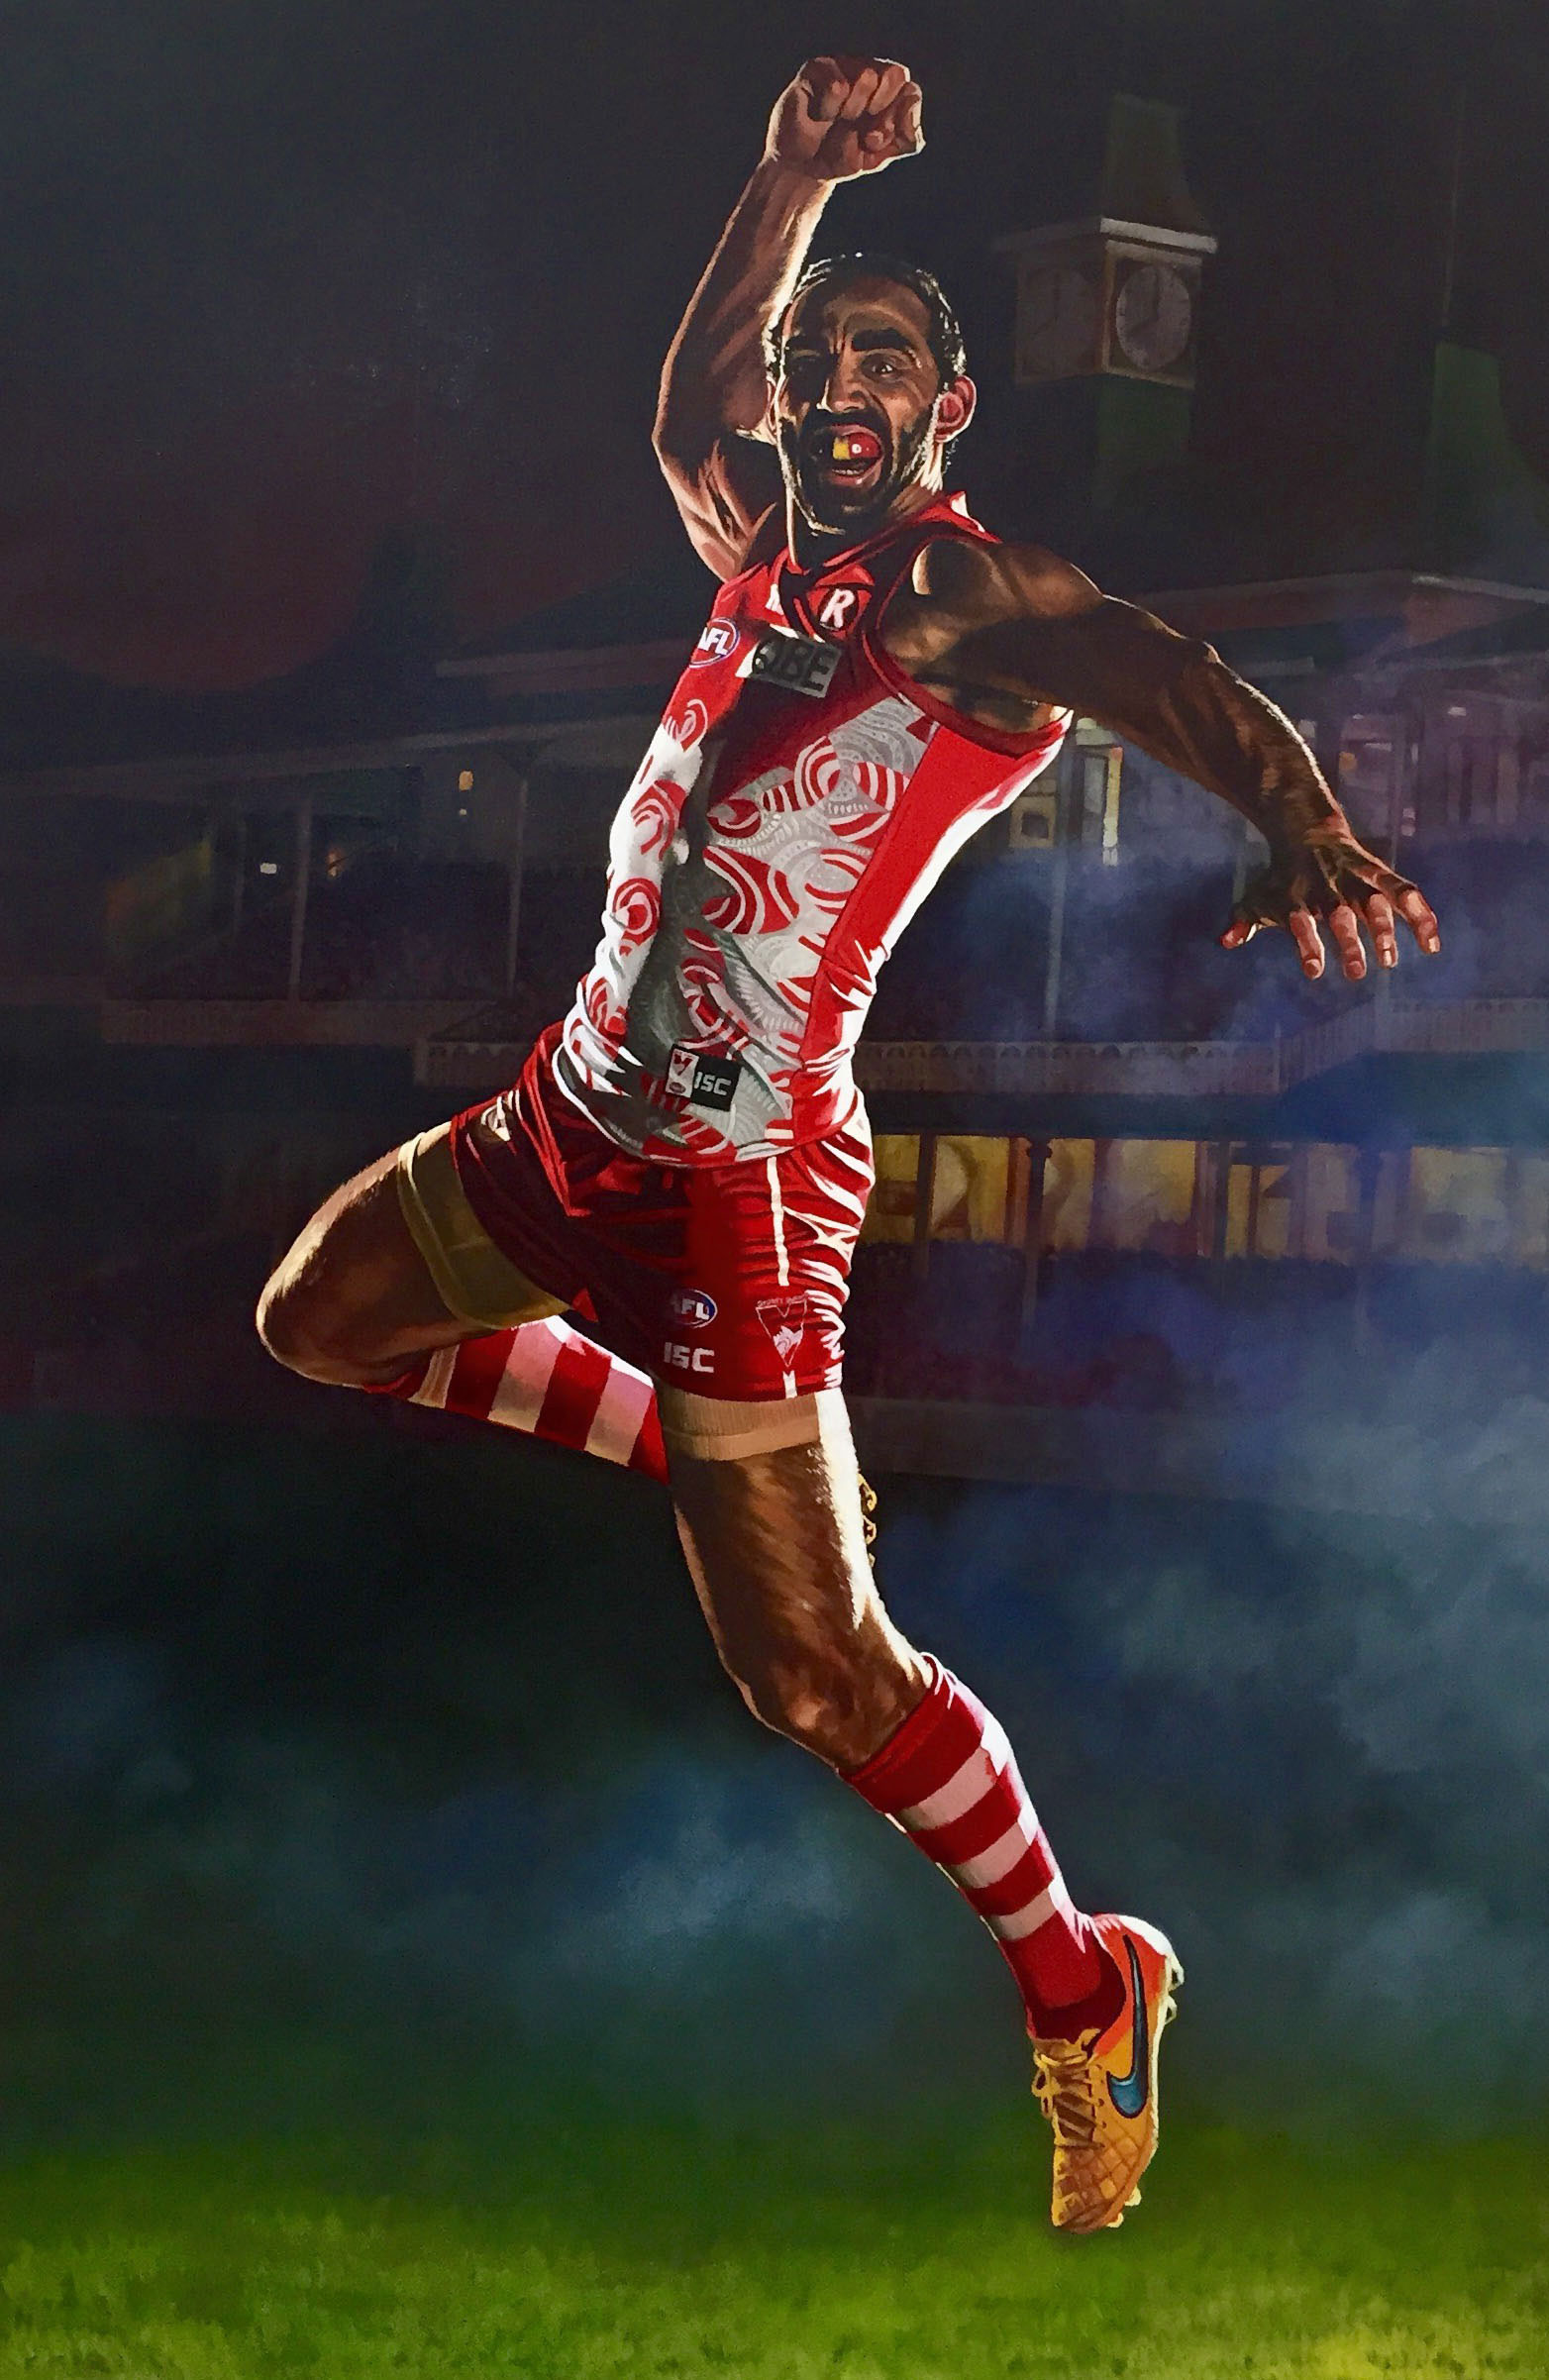 Adam Goodes – The Dance. Oil on canvas 1.8 x 1.2 metres by former AFL Fitzroy footballer, Jamie Cooper. This artwork was created in collaboration with Adam to celebrate his journey as an AFL footballer and a man.